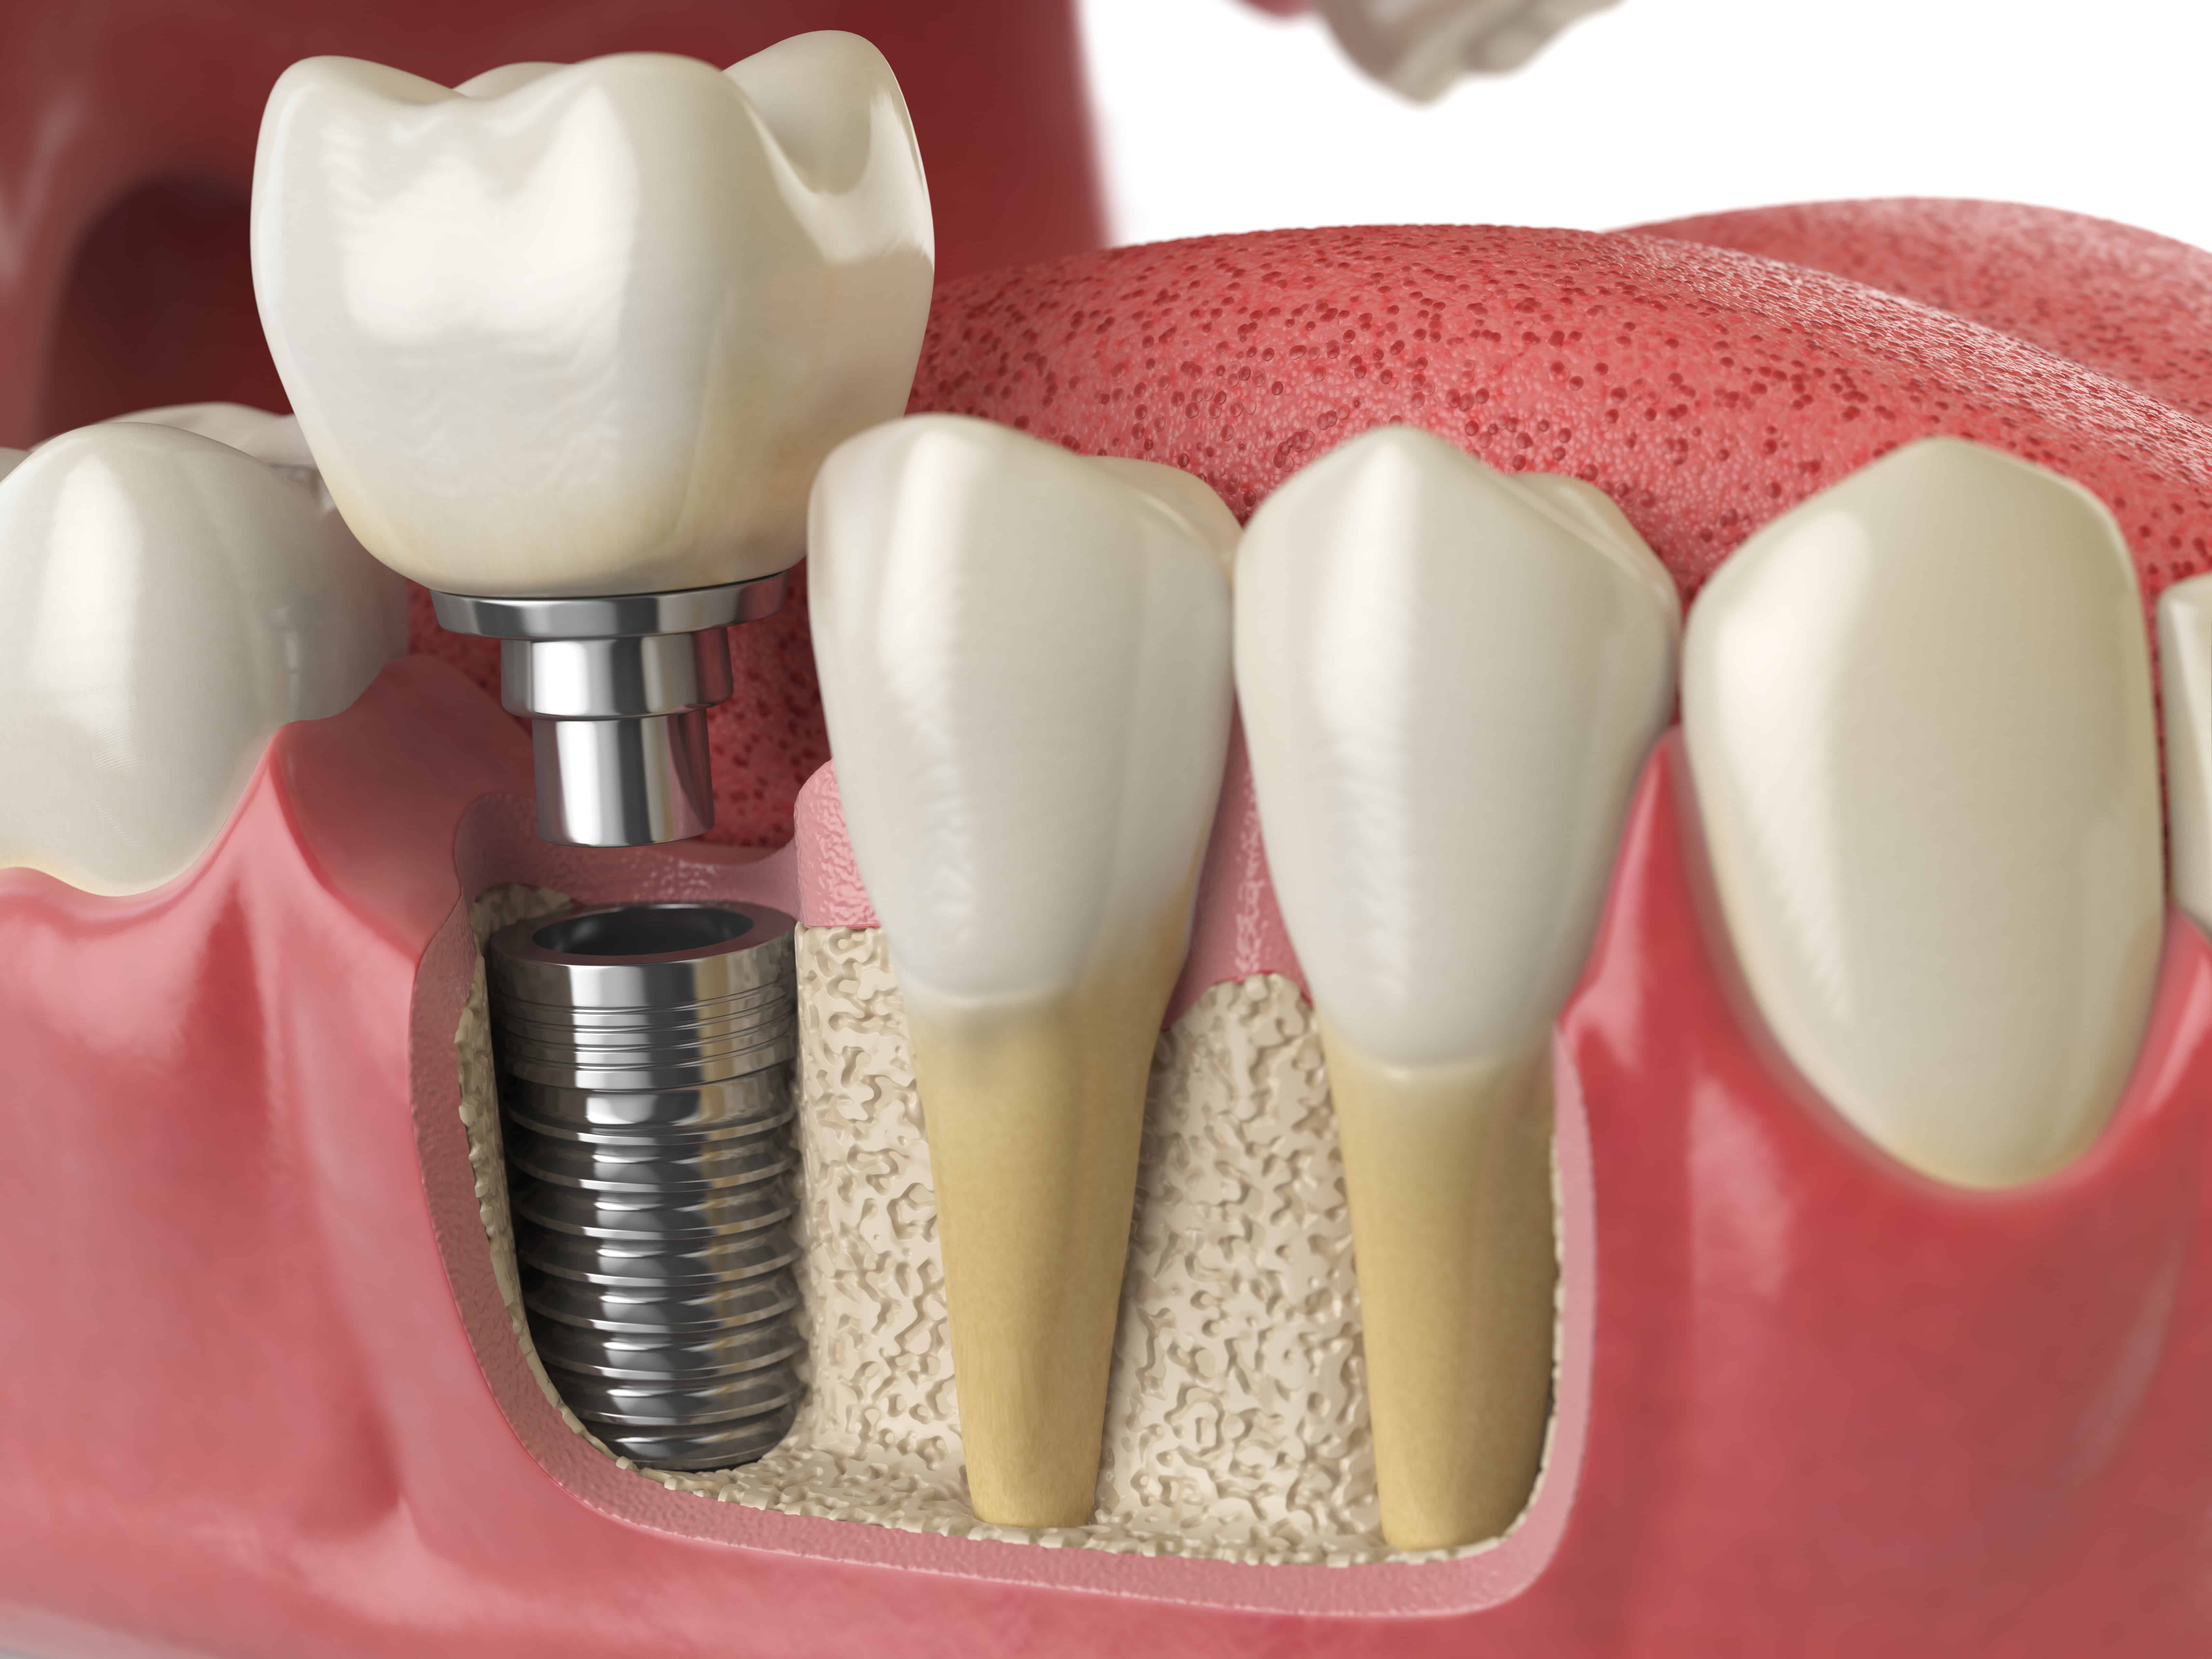 3 methods for Dental Implant Costs